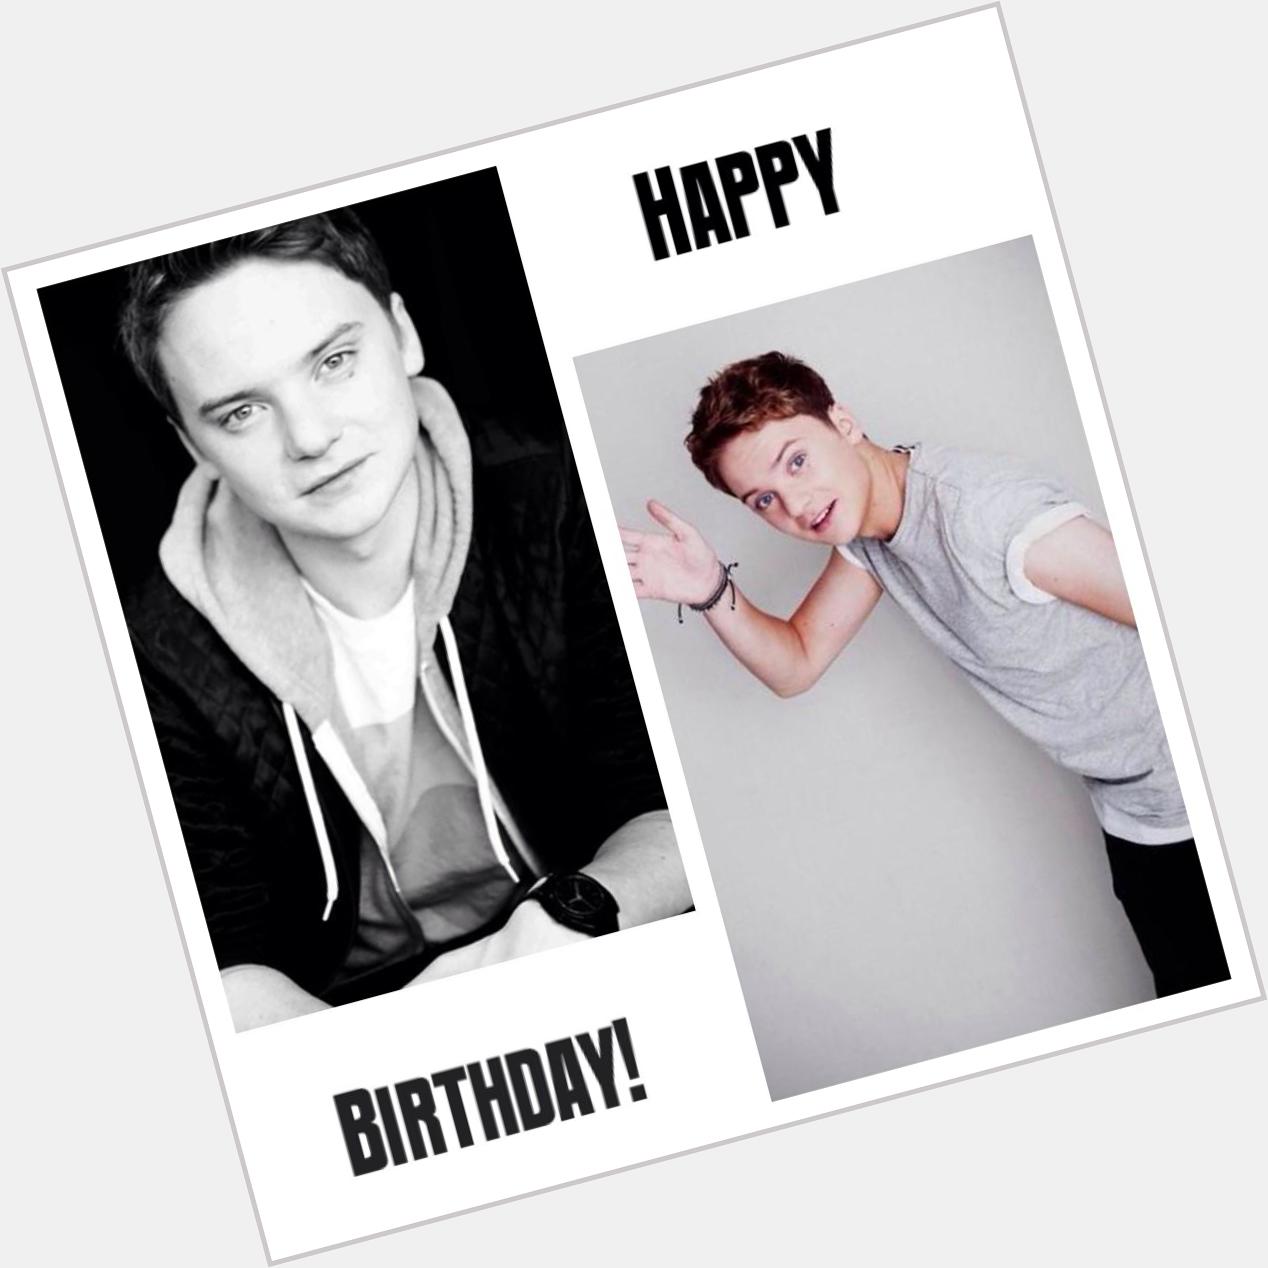 Happy Birthday Conor Maynard!
I hope you have an amazing day!
Big love from Belgium!   